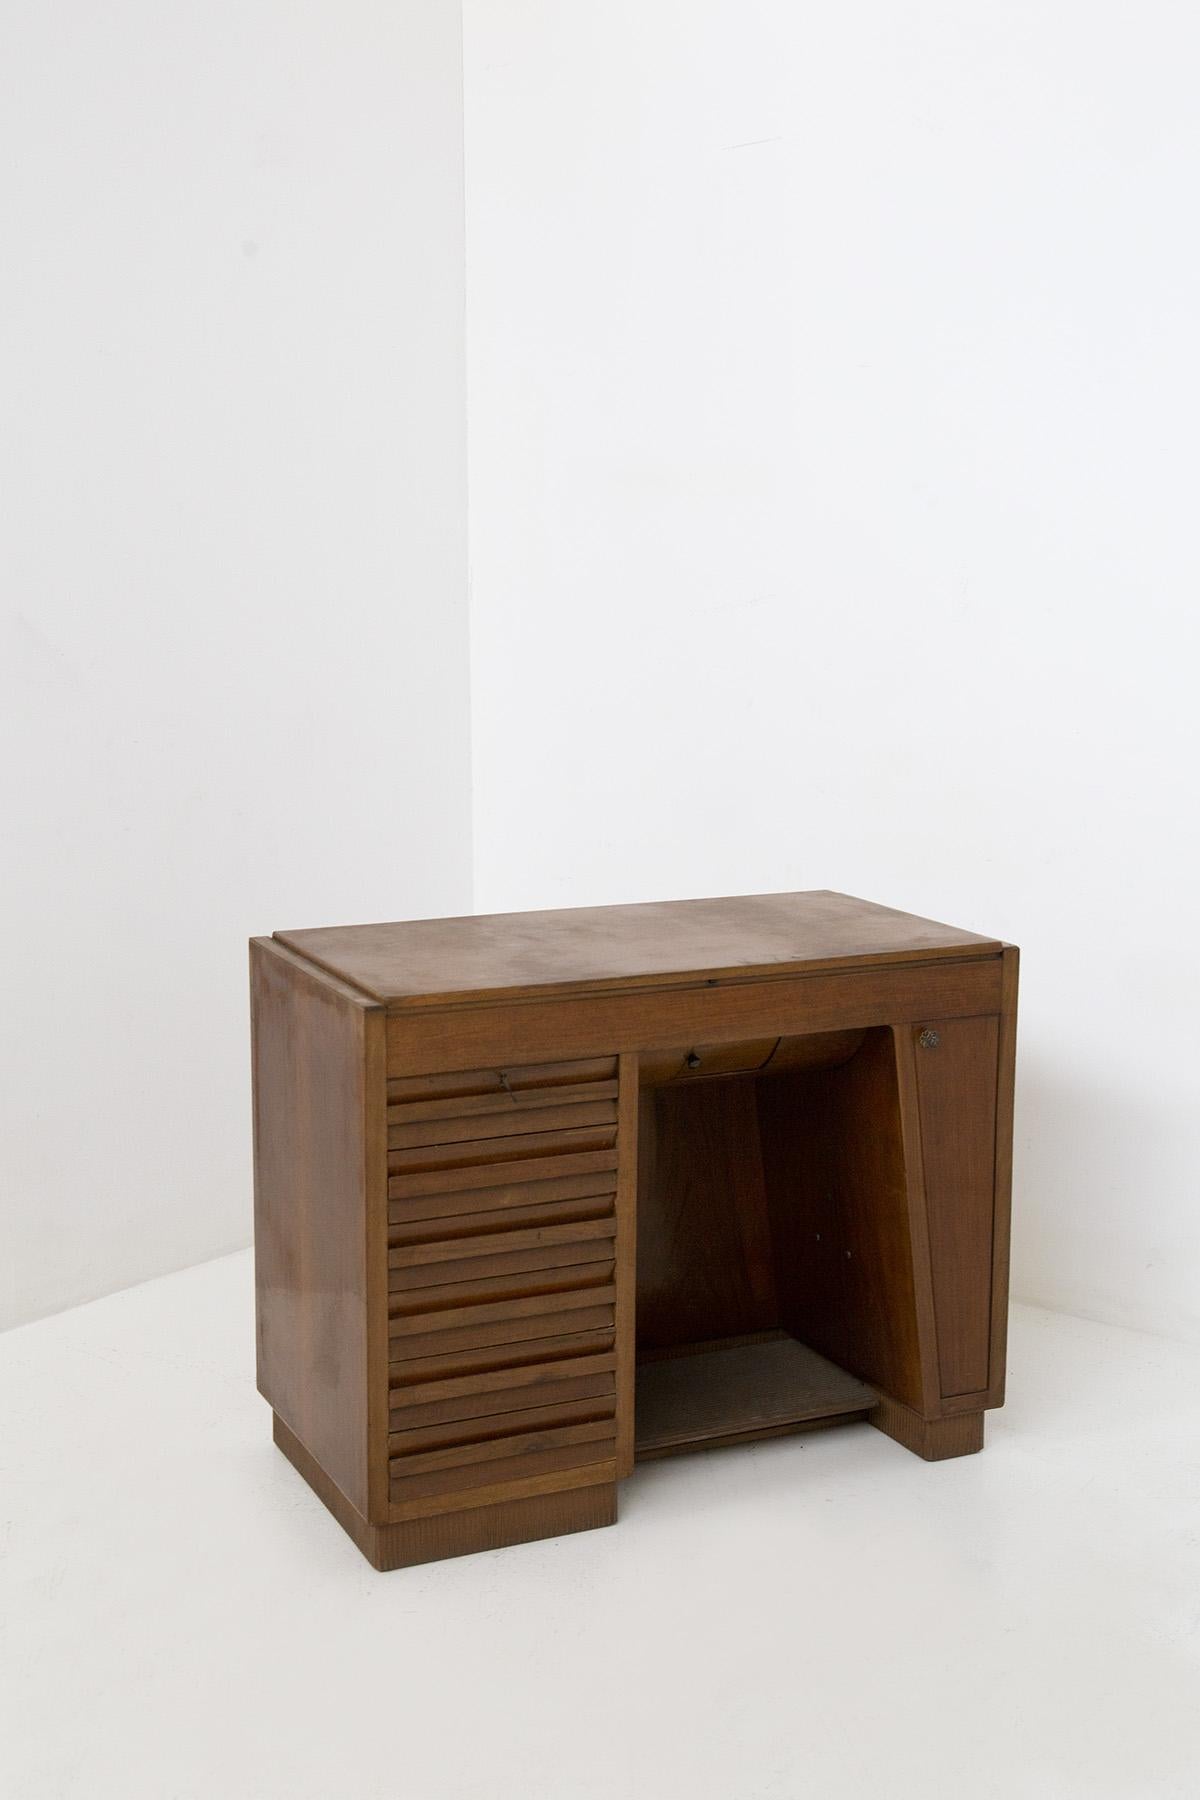 Elegant Italian desk convertible into sewing machine from the 1950s. The desk through its shapes and lines is very reminiscent of Gio Ponti's design line. The desk is made by the Vigorelli ( of Pavia) manufactory. The small desk has in the left side